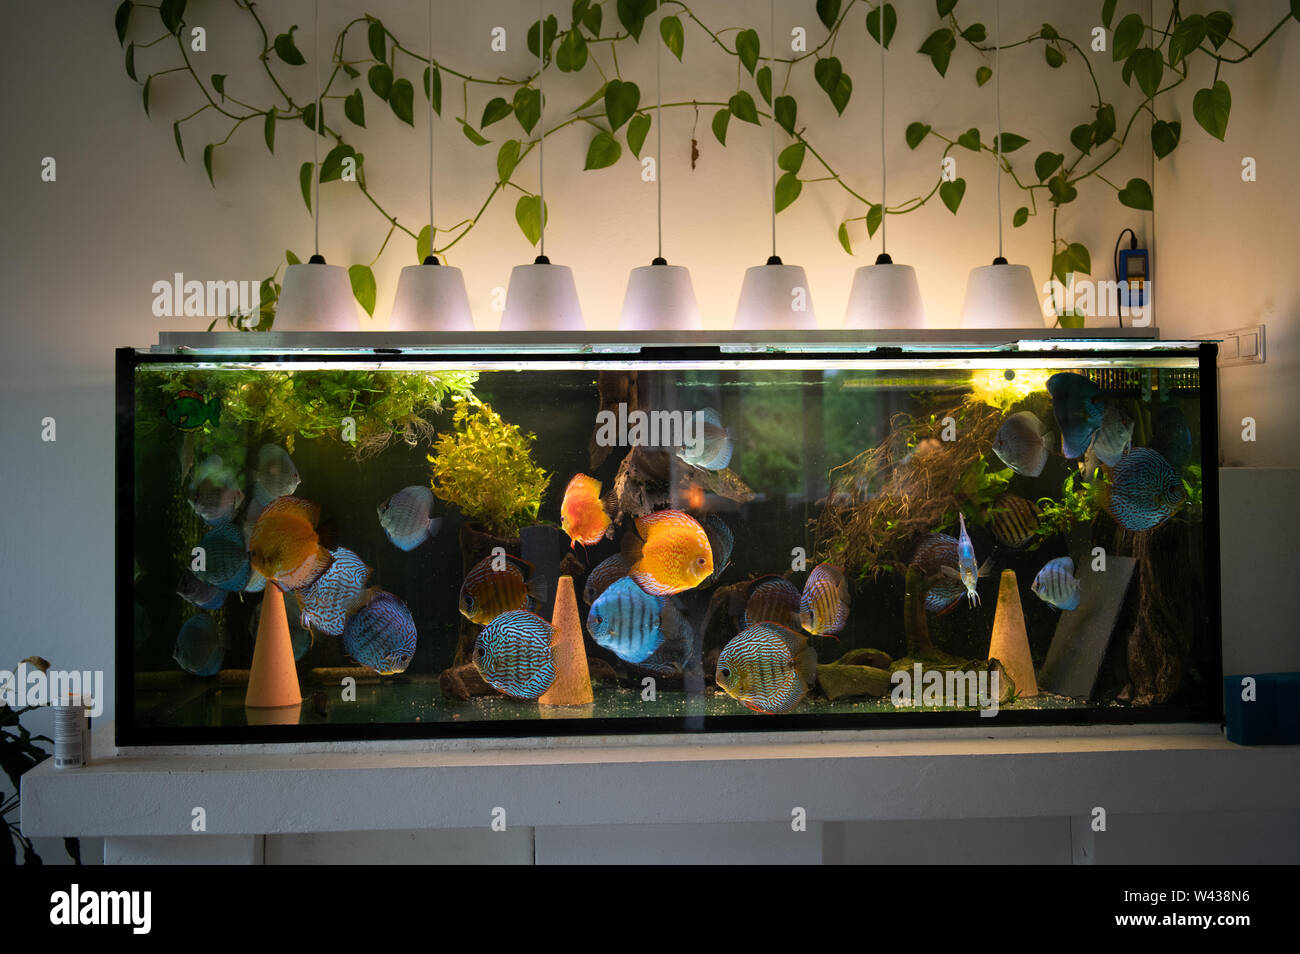 Big Aquarium With Colourful Discus Fishes And Plants In A Living Room Symphysodon Of Amazon River In South America Fishkeeping And Fish Breeding Stock Photo Alamy